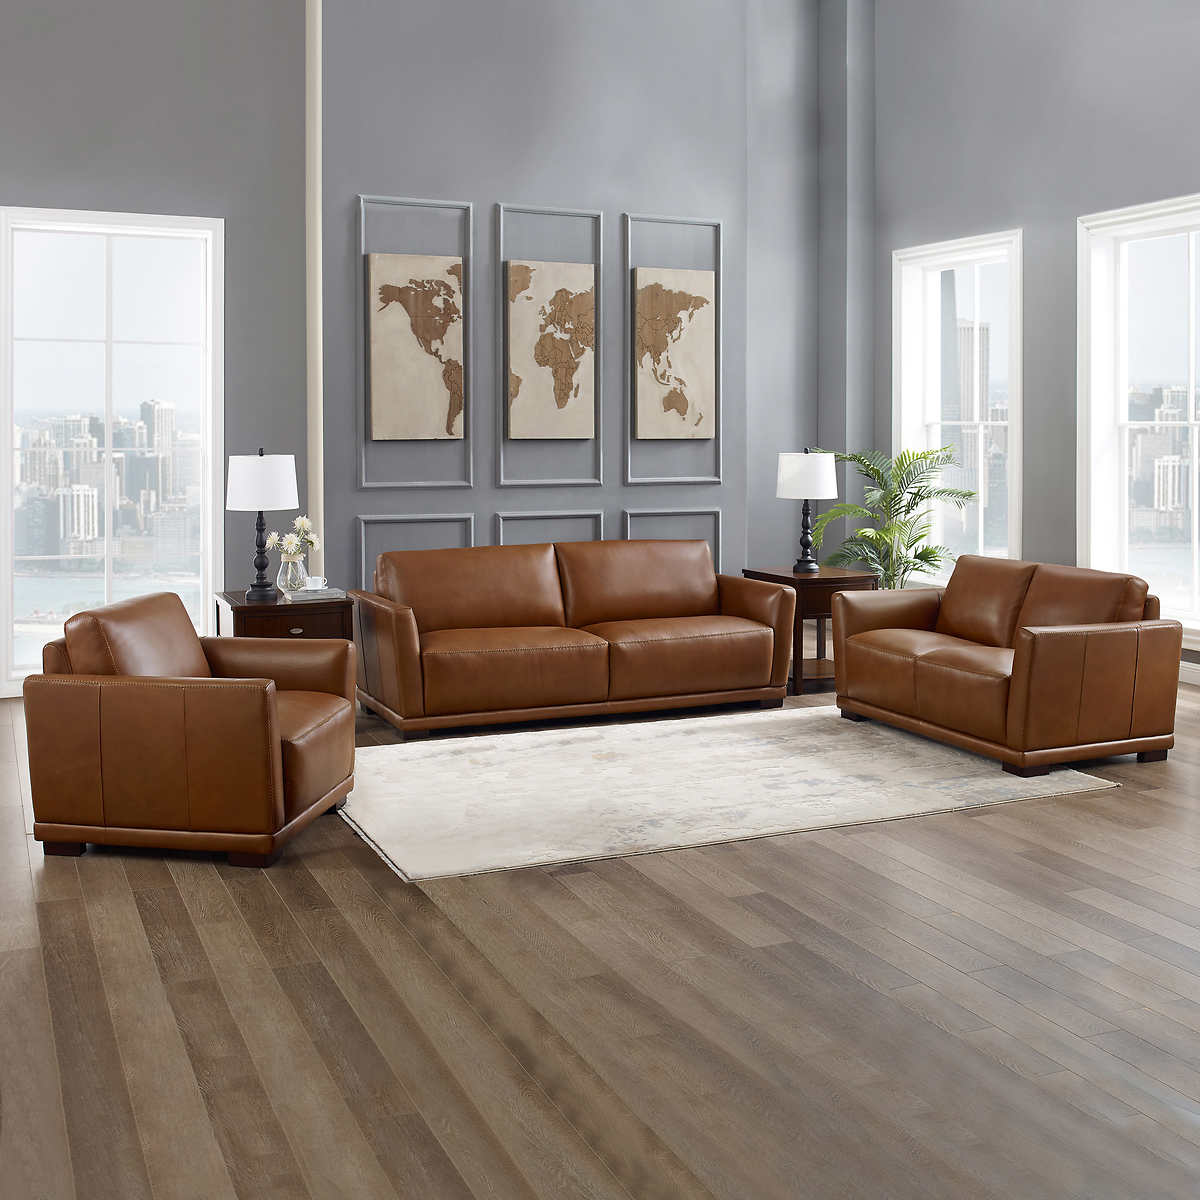 Colby 3 Piece Leather Sofa Loveseat, Light Brown Leather Couch And Loveseat